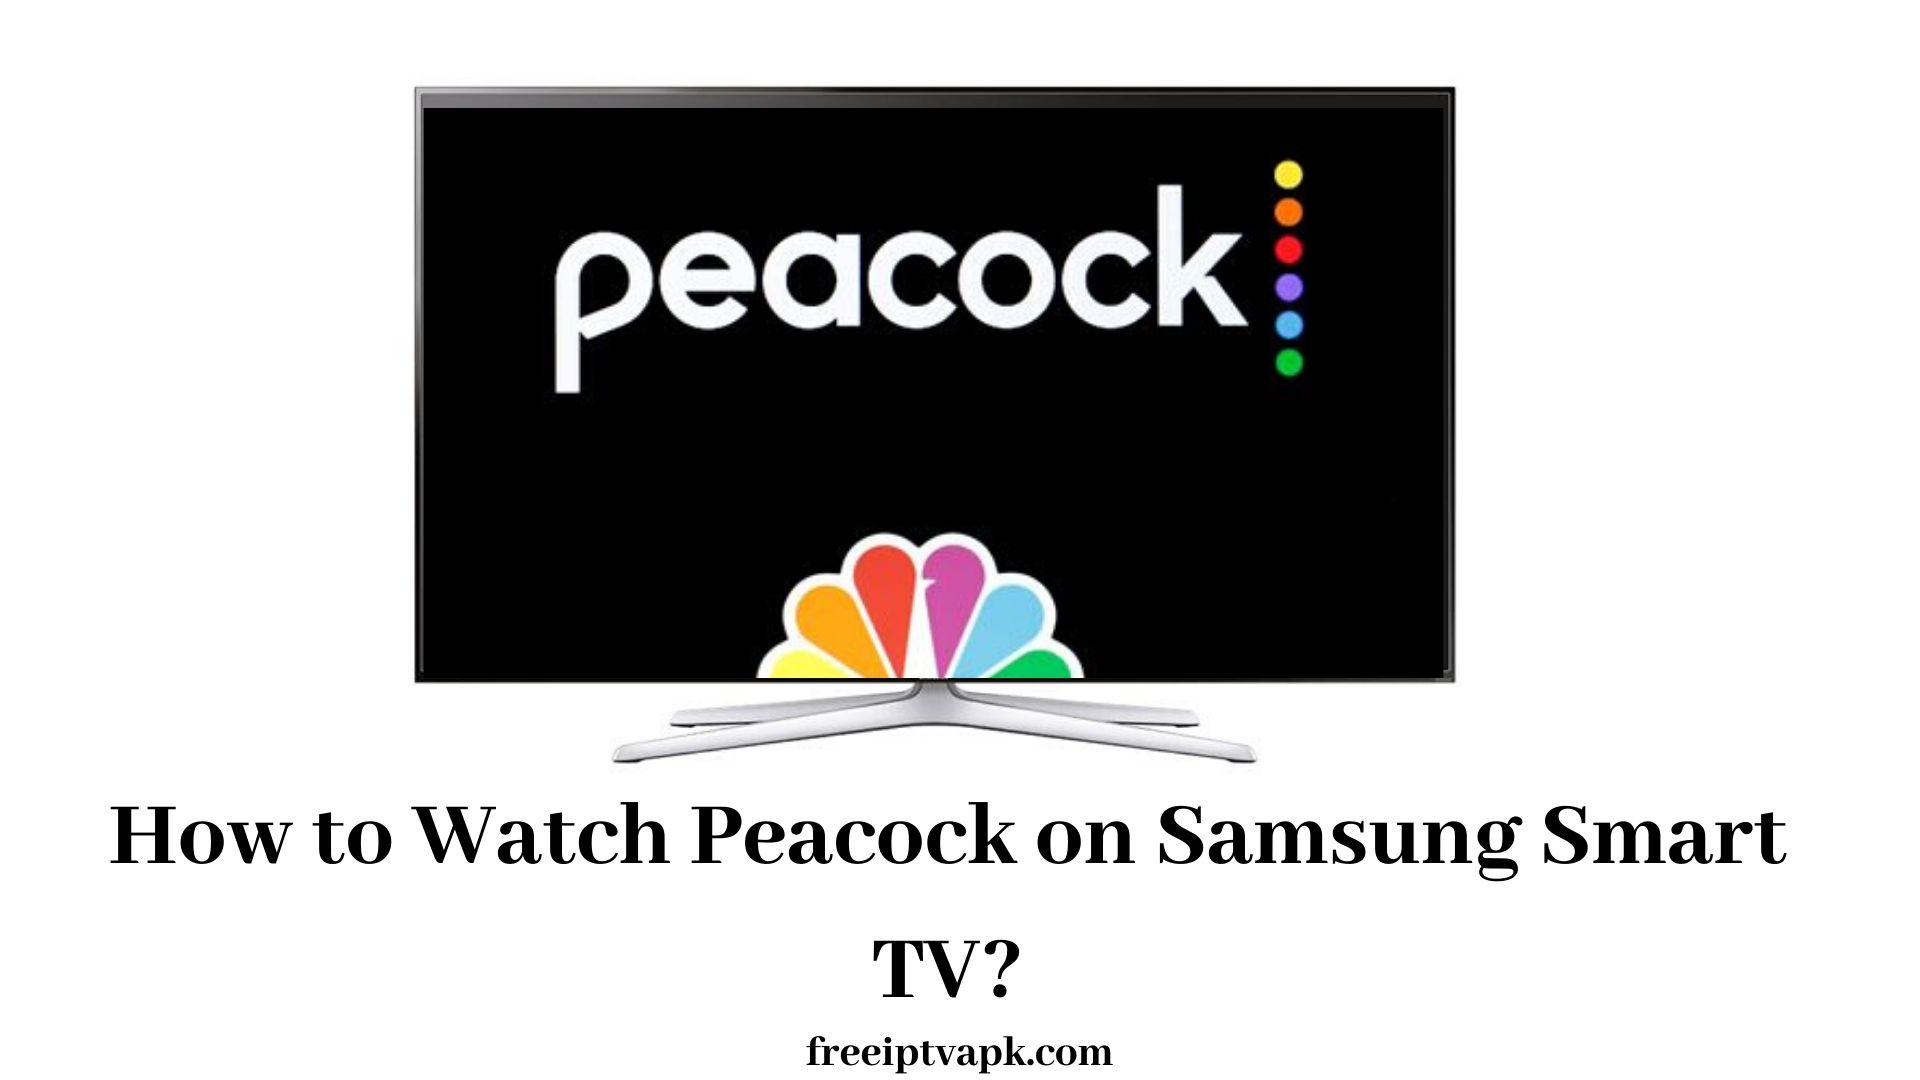 How to Watch Peacock on Samsung Smart TV?